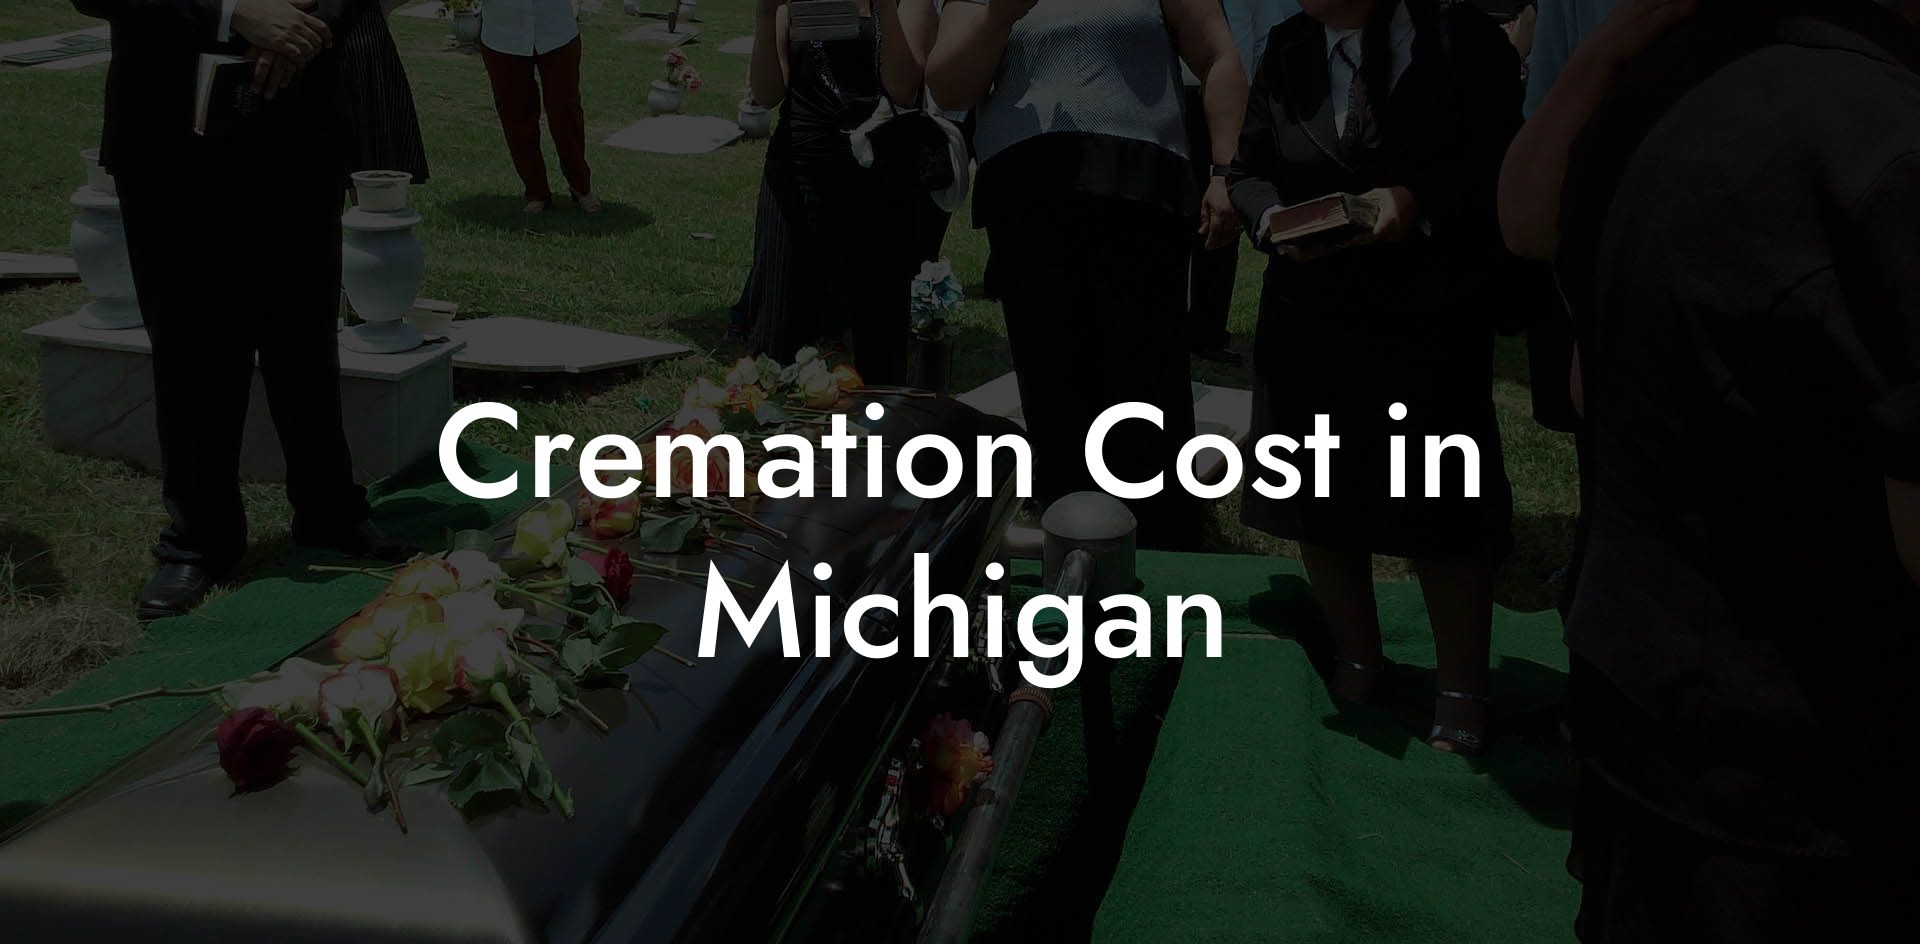 Cremation Cost in Michigan